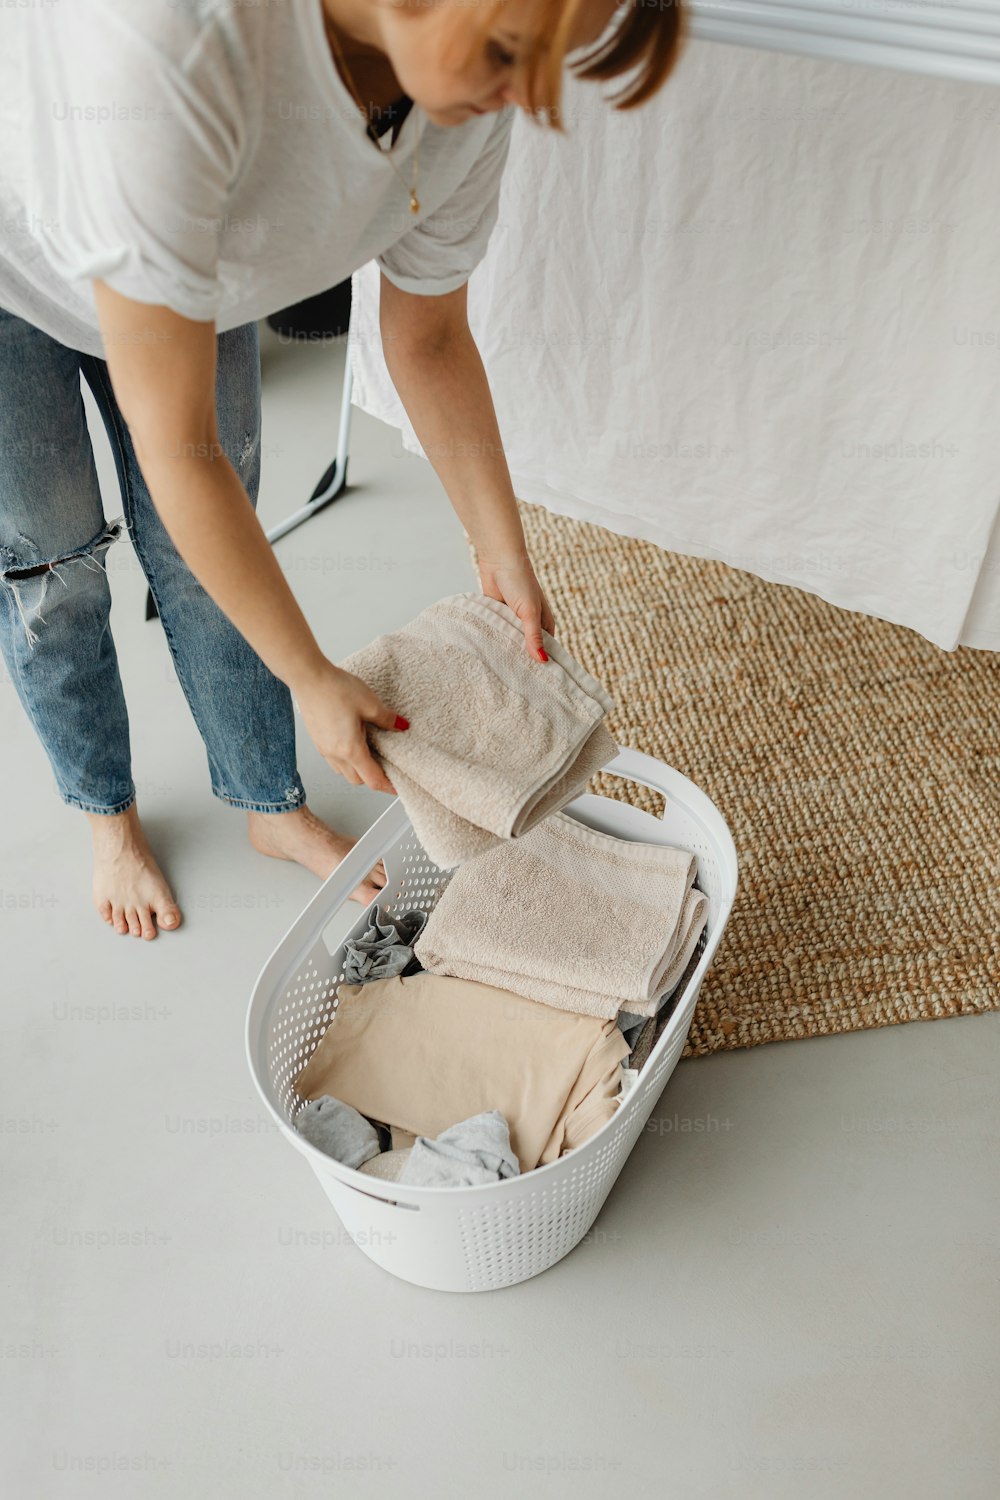 a woman unpacking clothes in a basket